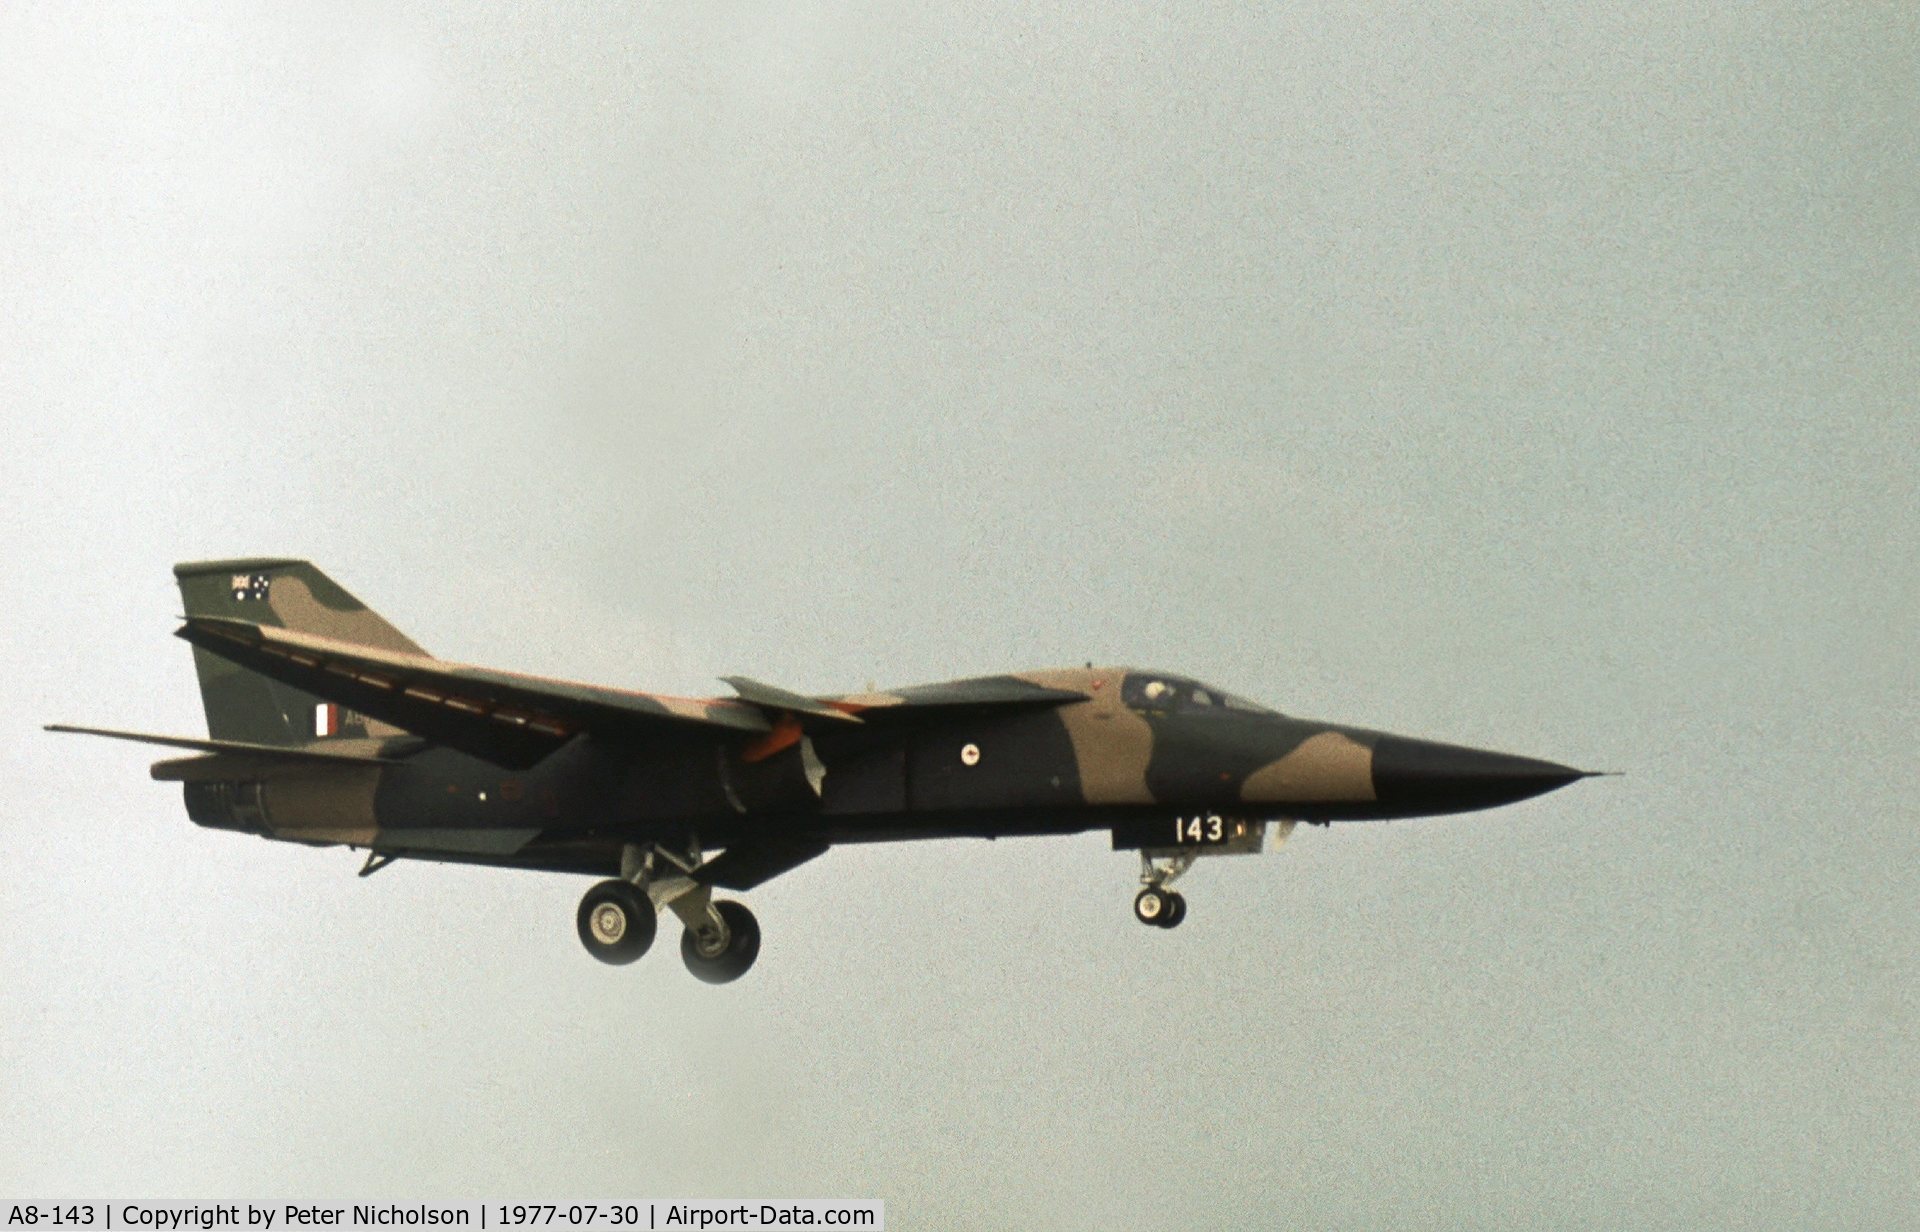 A8-143, 1973 General Dynamics F-111C Aardvark C/N D1-19, Another view of the F-111C of 6 Squadron RAAF which attended the 1977 Royal Review at RAF Finningley.